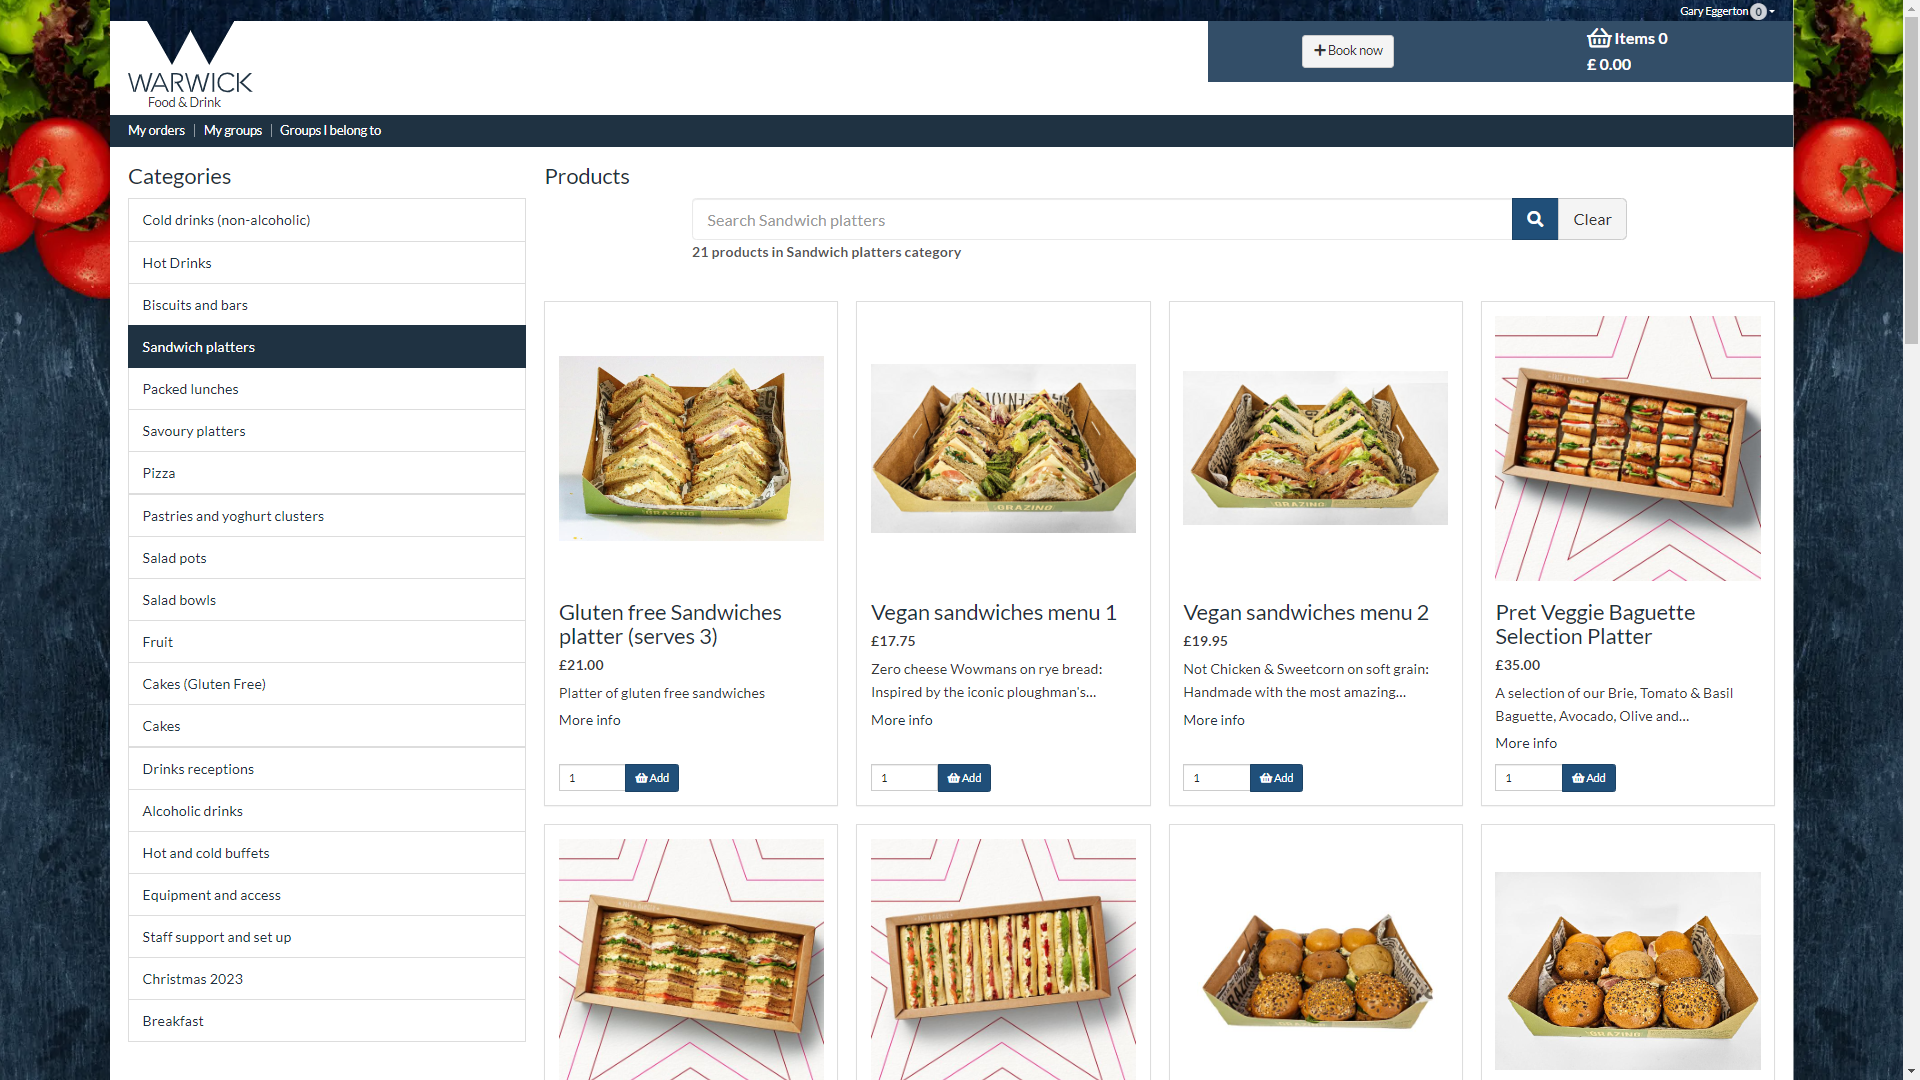 Warwick Food & Drink Products Page